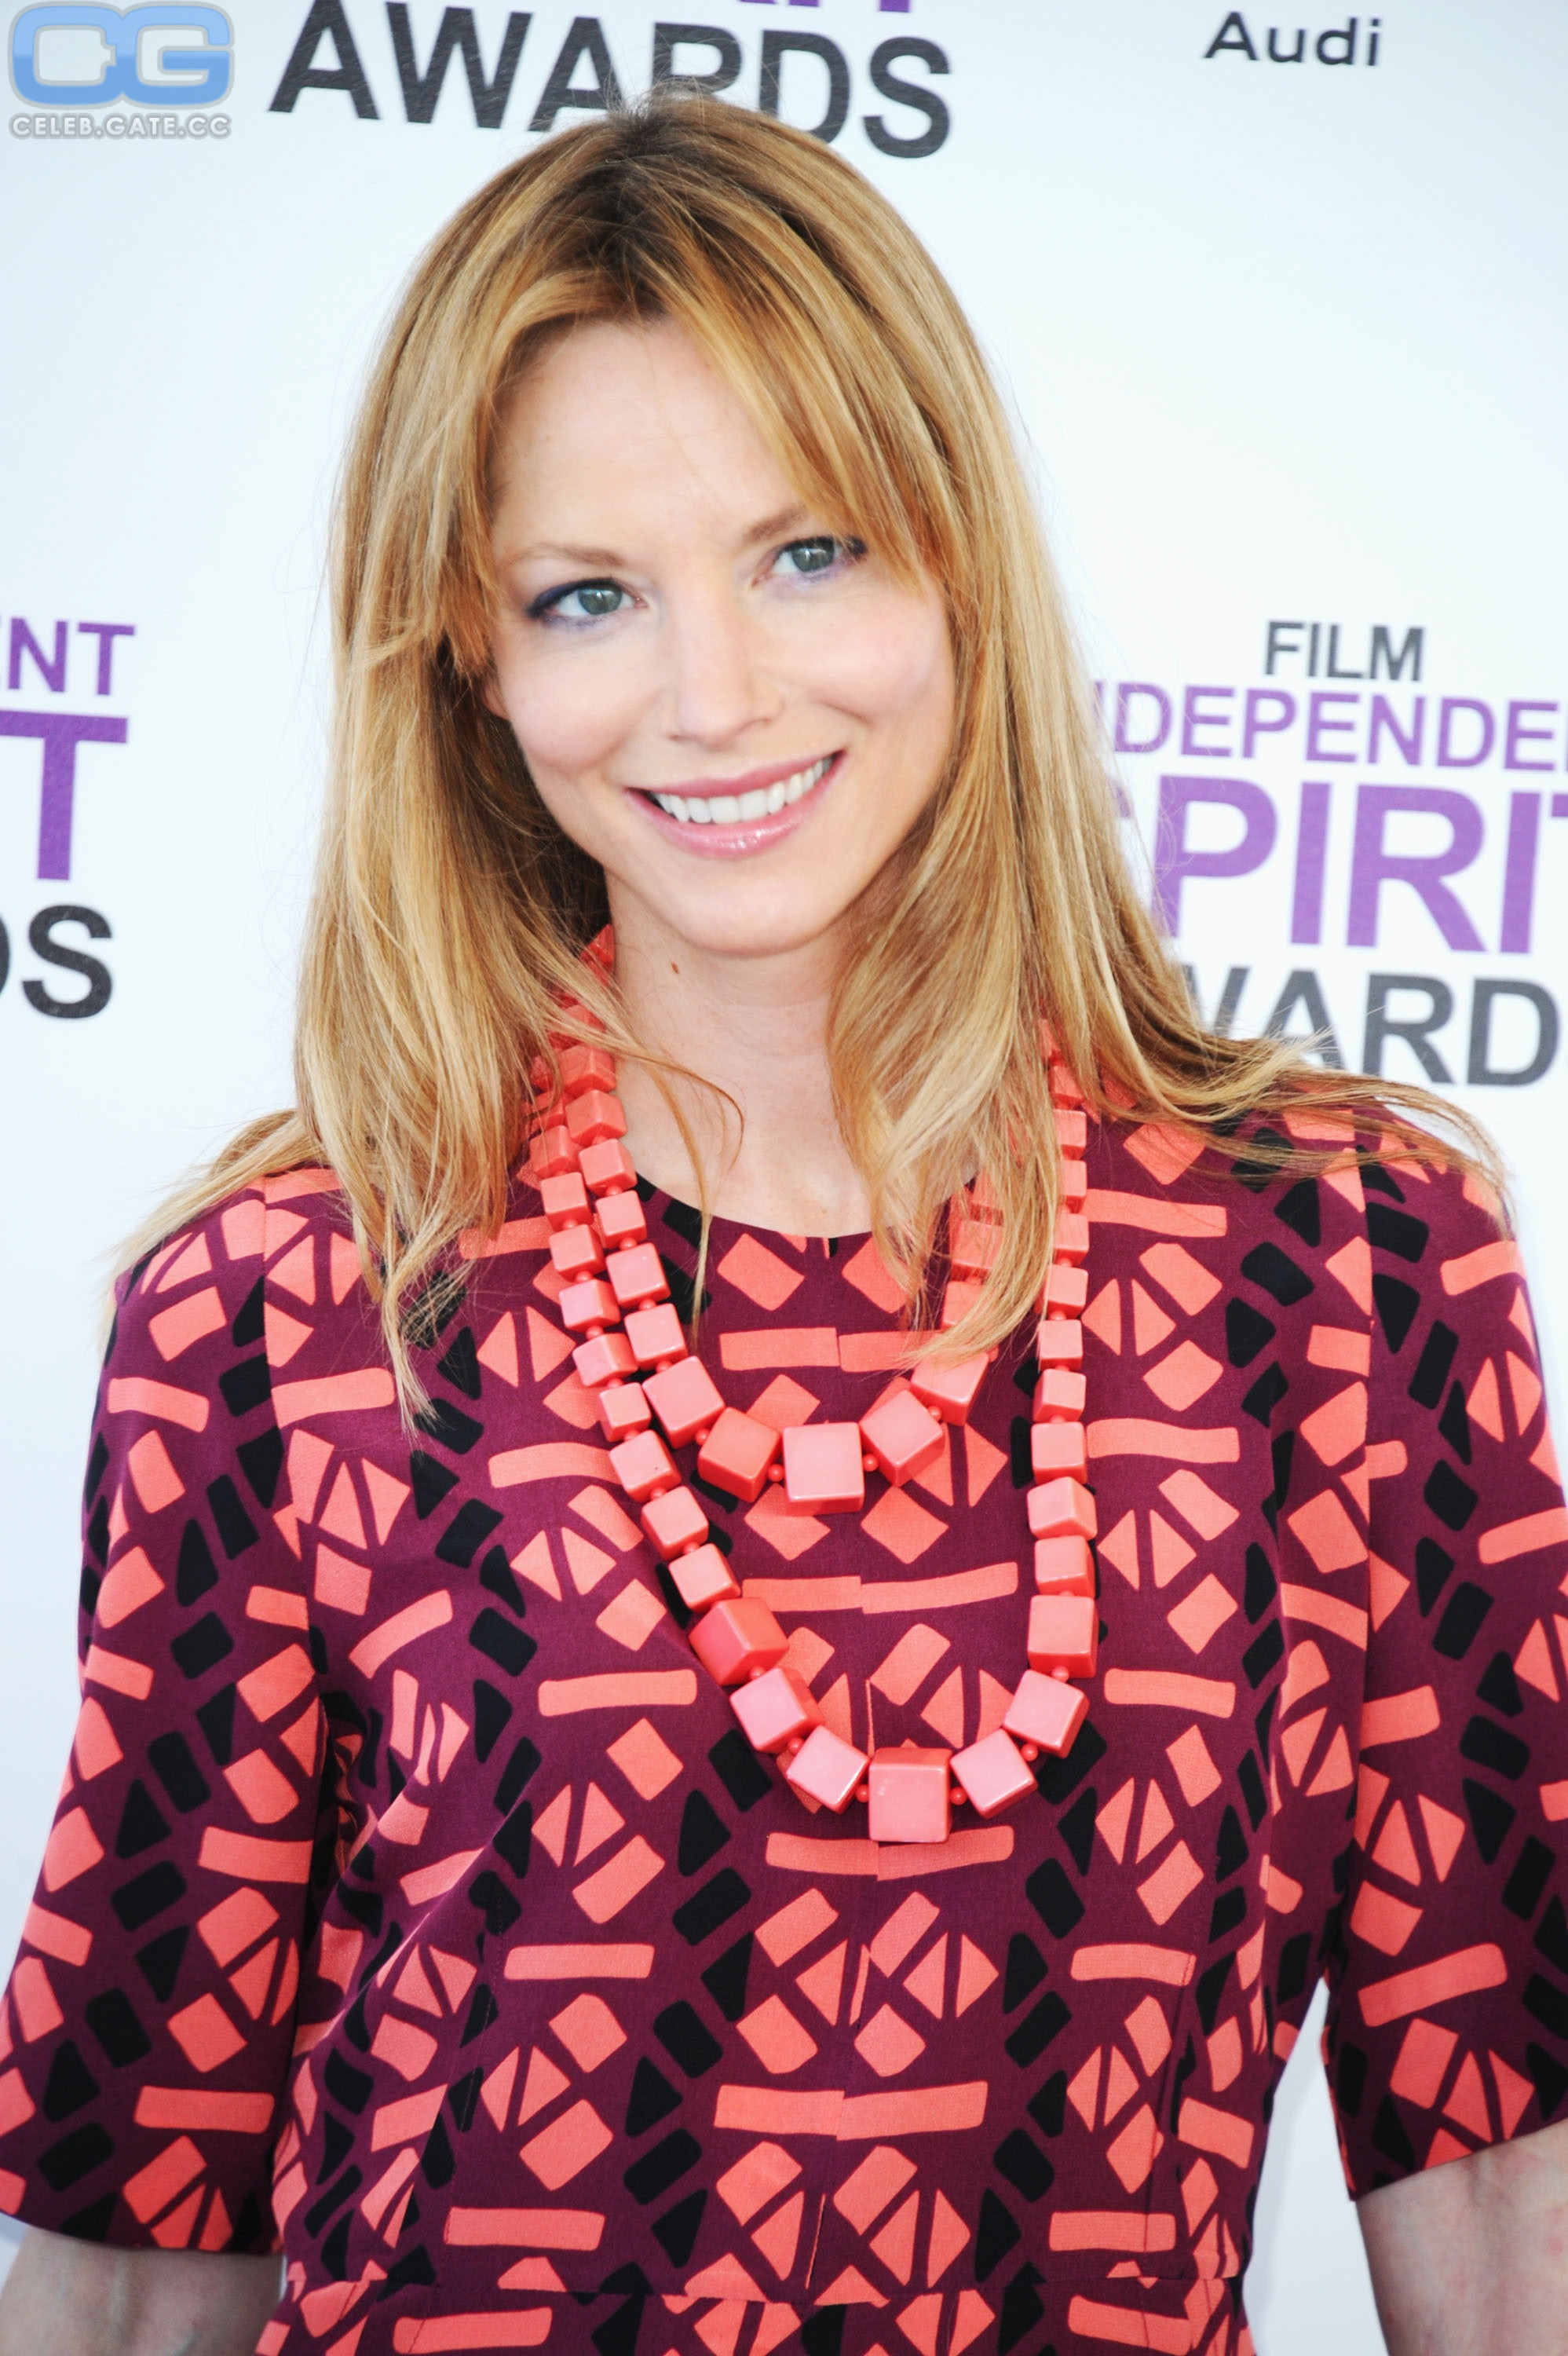 Sienna Guillory smiling